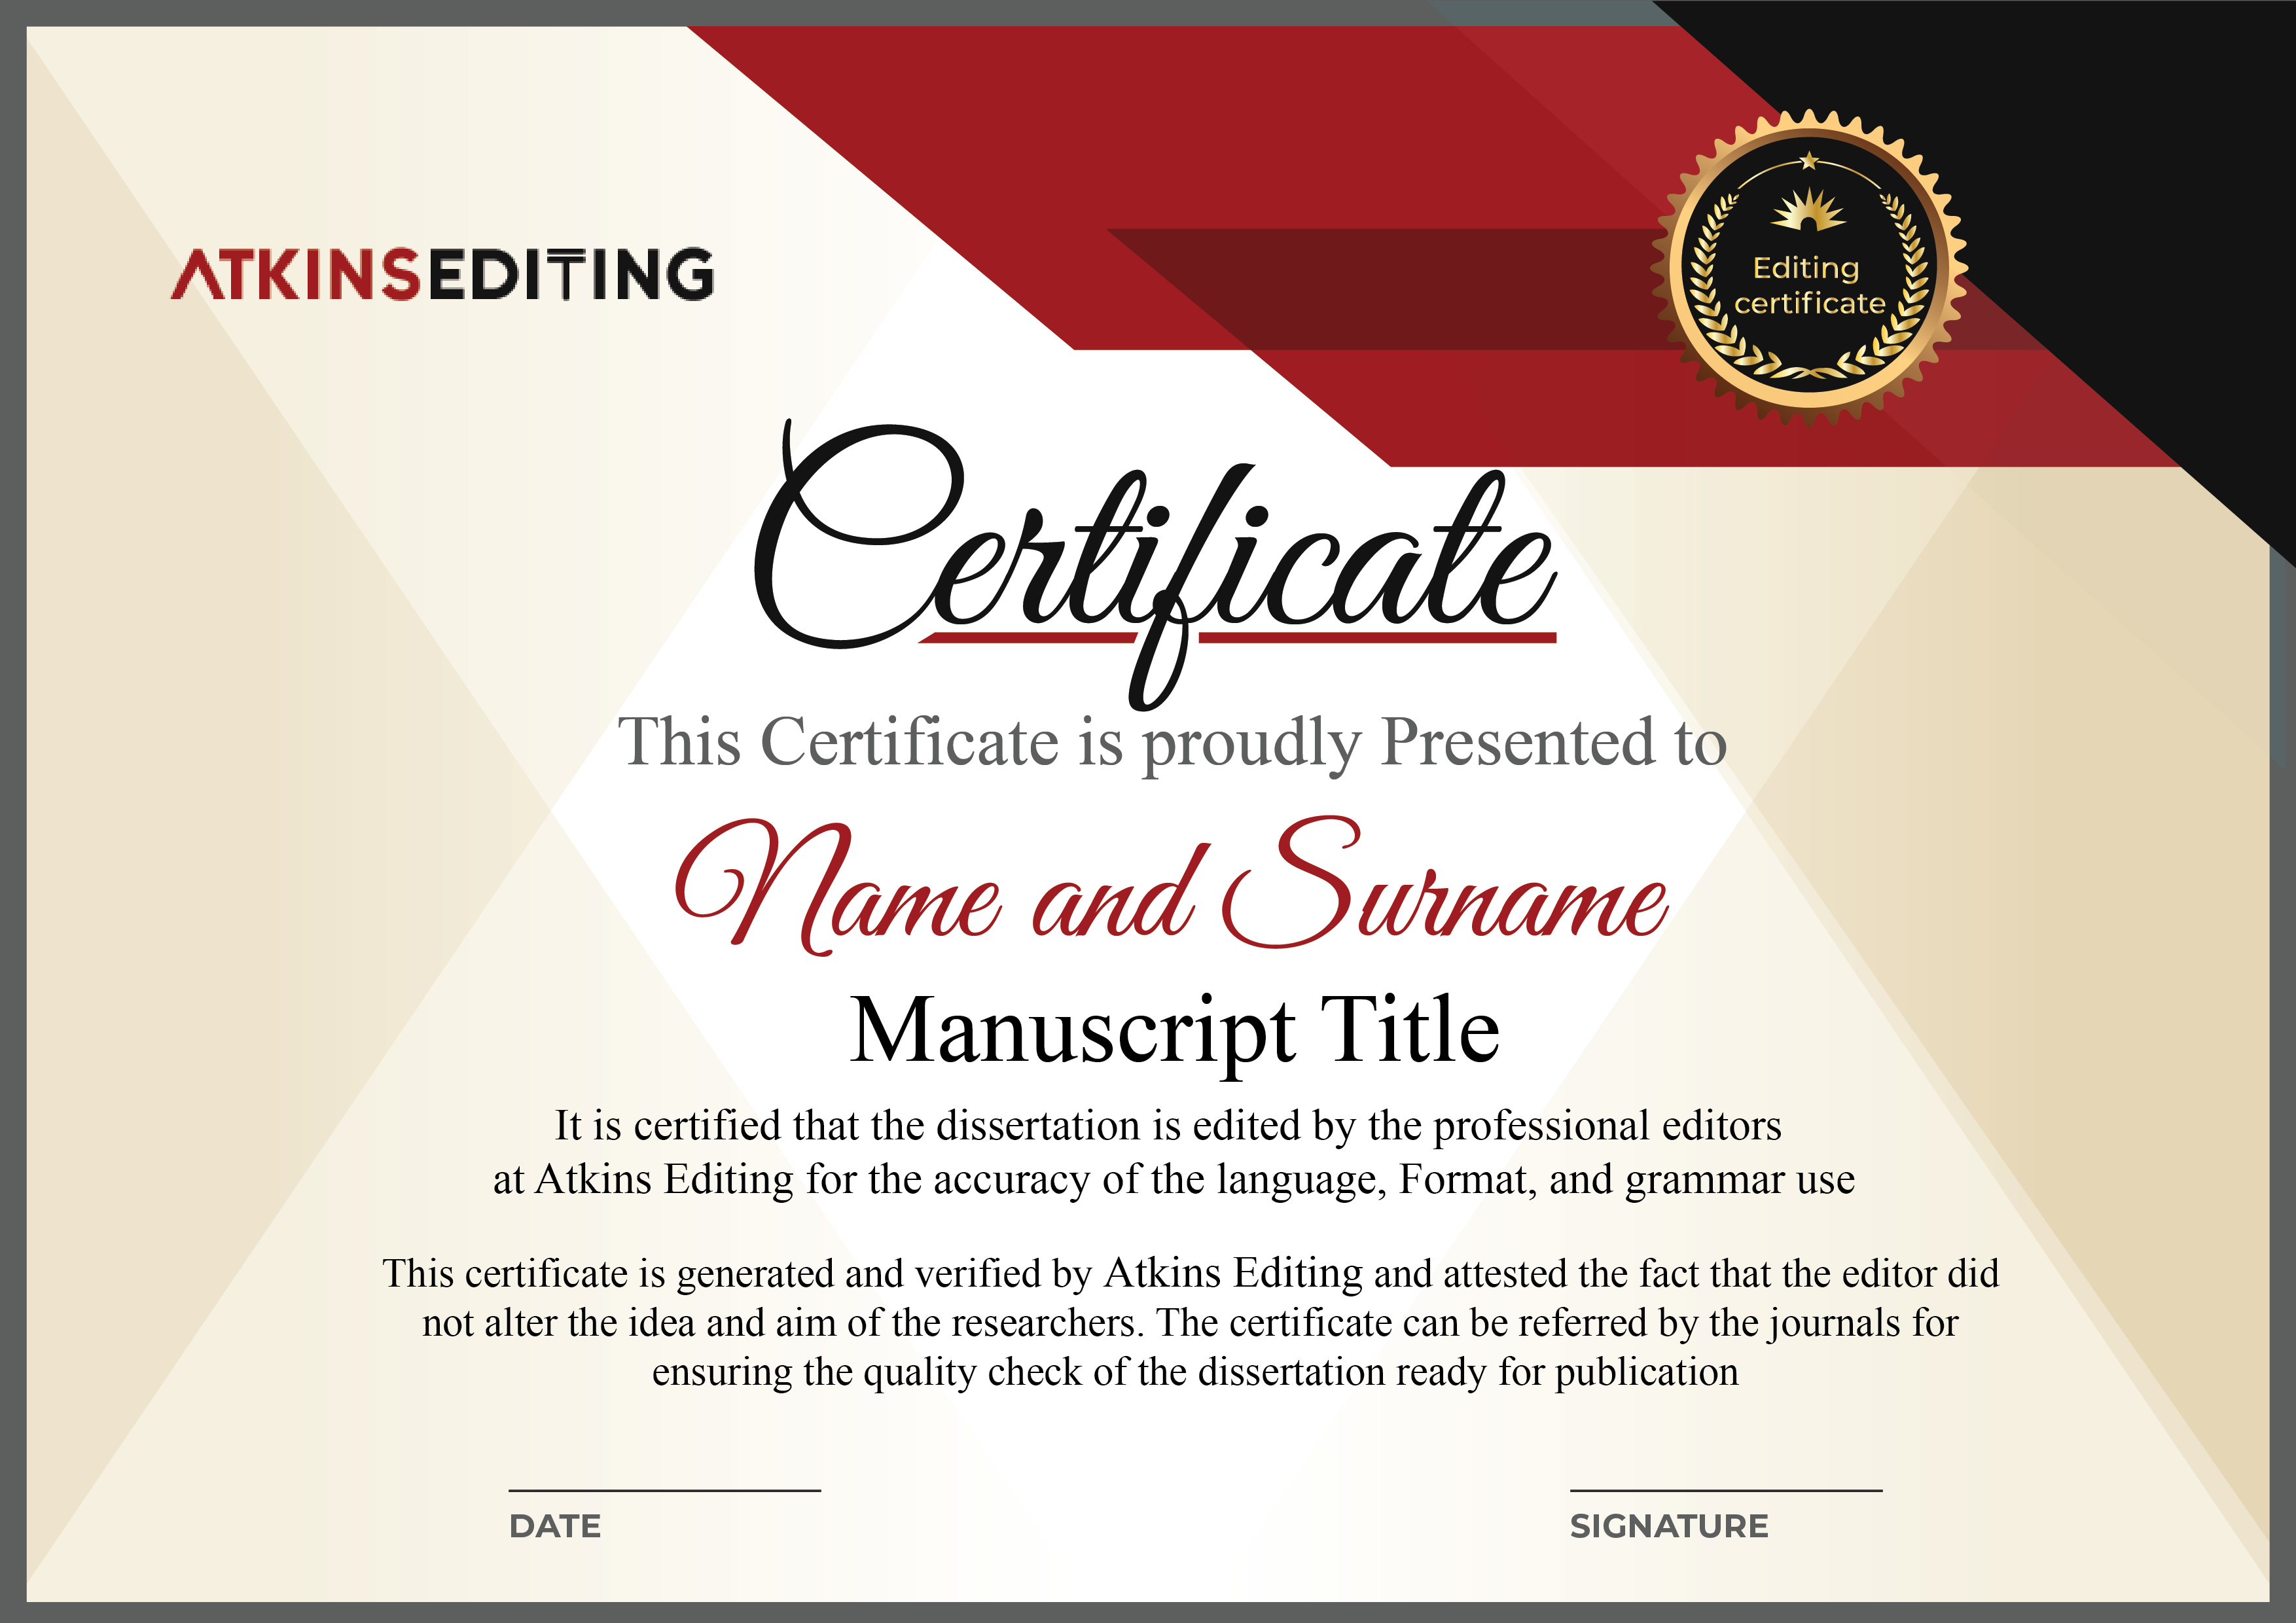 Certificate of High Quality Editing Atkins Editing